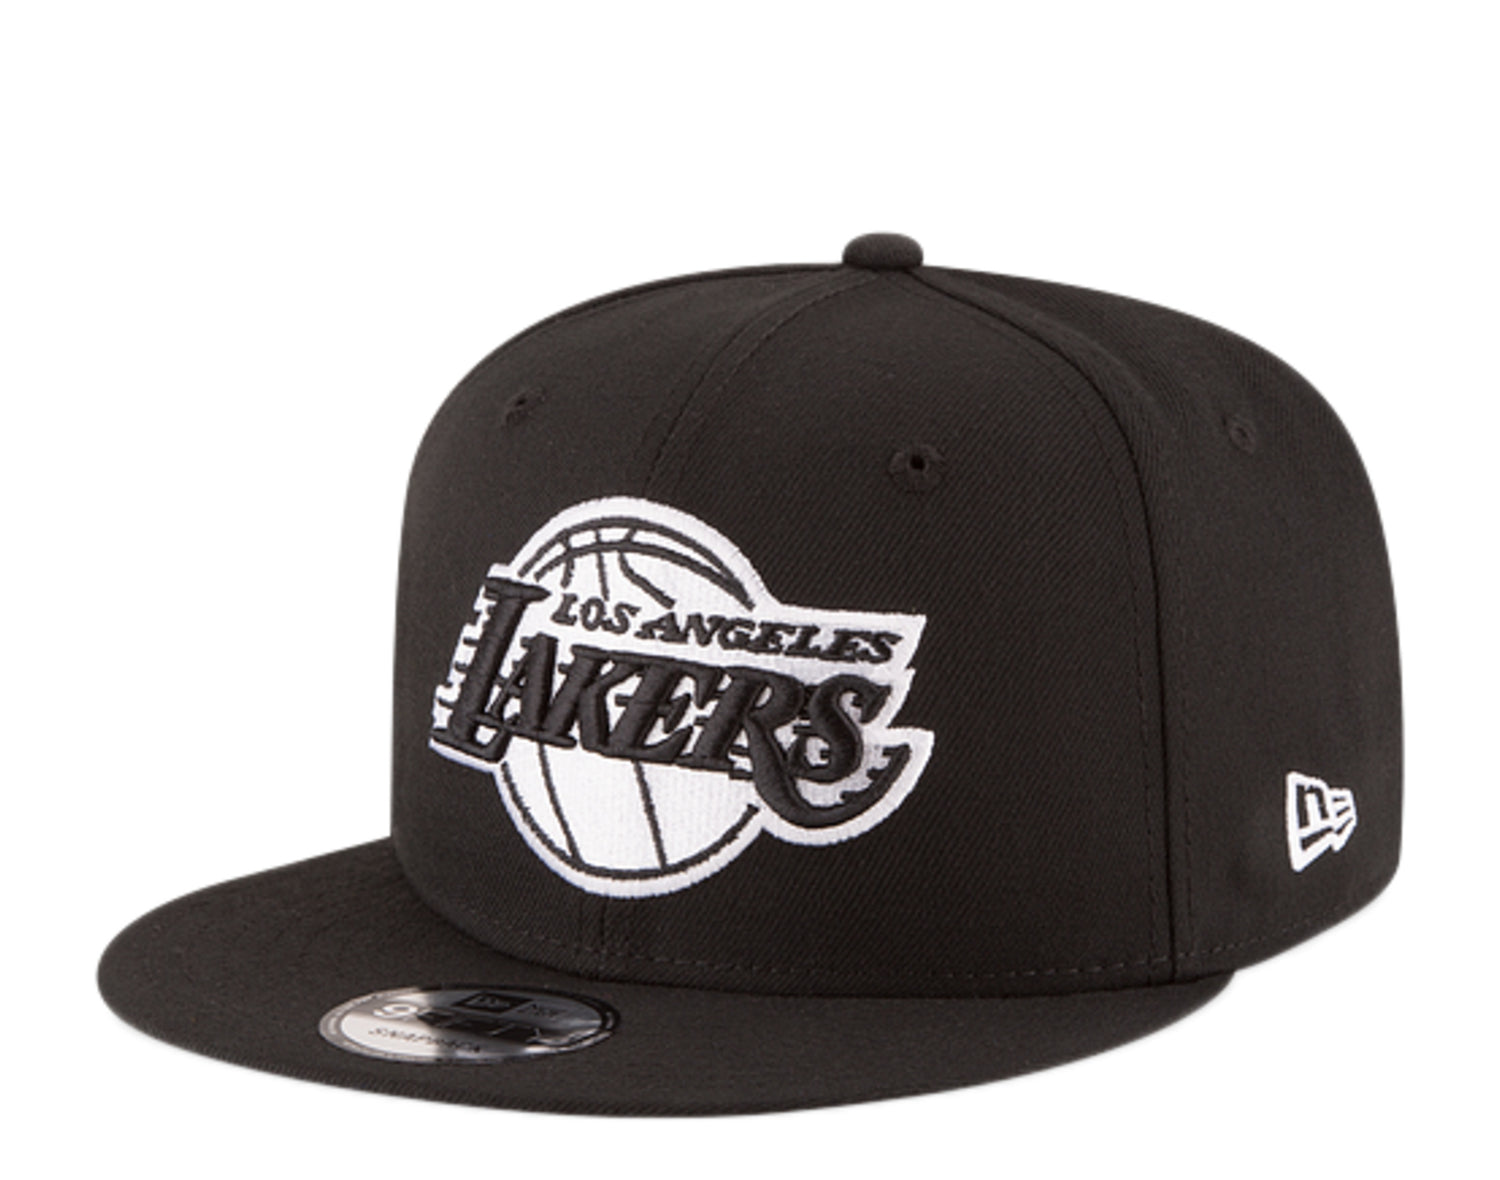 New Era 9Fifty NBA Los Angeles Lakers Black And White Snapback Hat